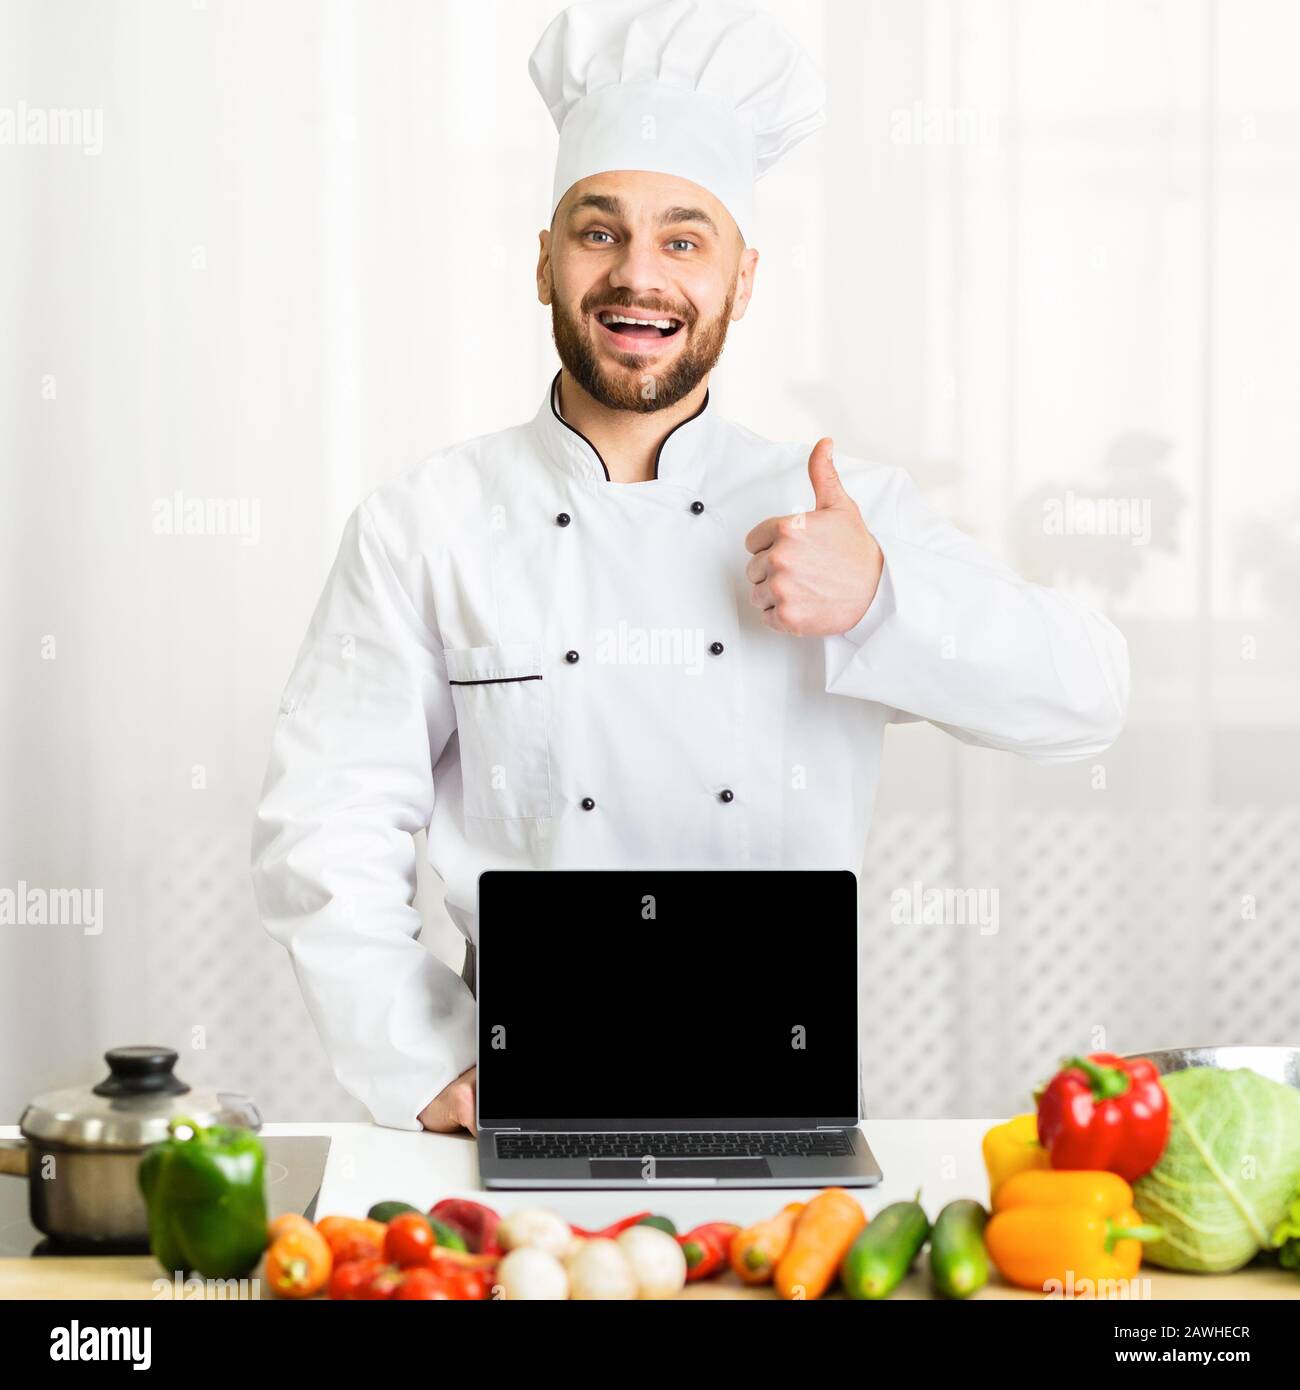 Chef Guy Holding Laptop Gesturing Thumbs-Up Standing In Cucina Foto Stock